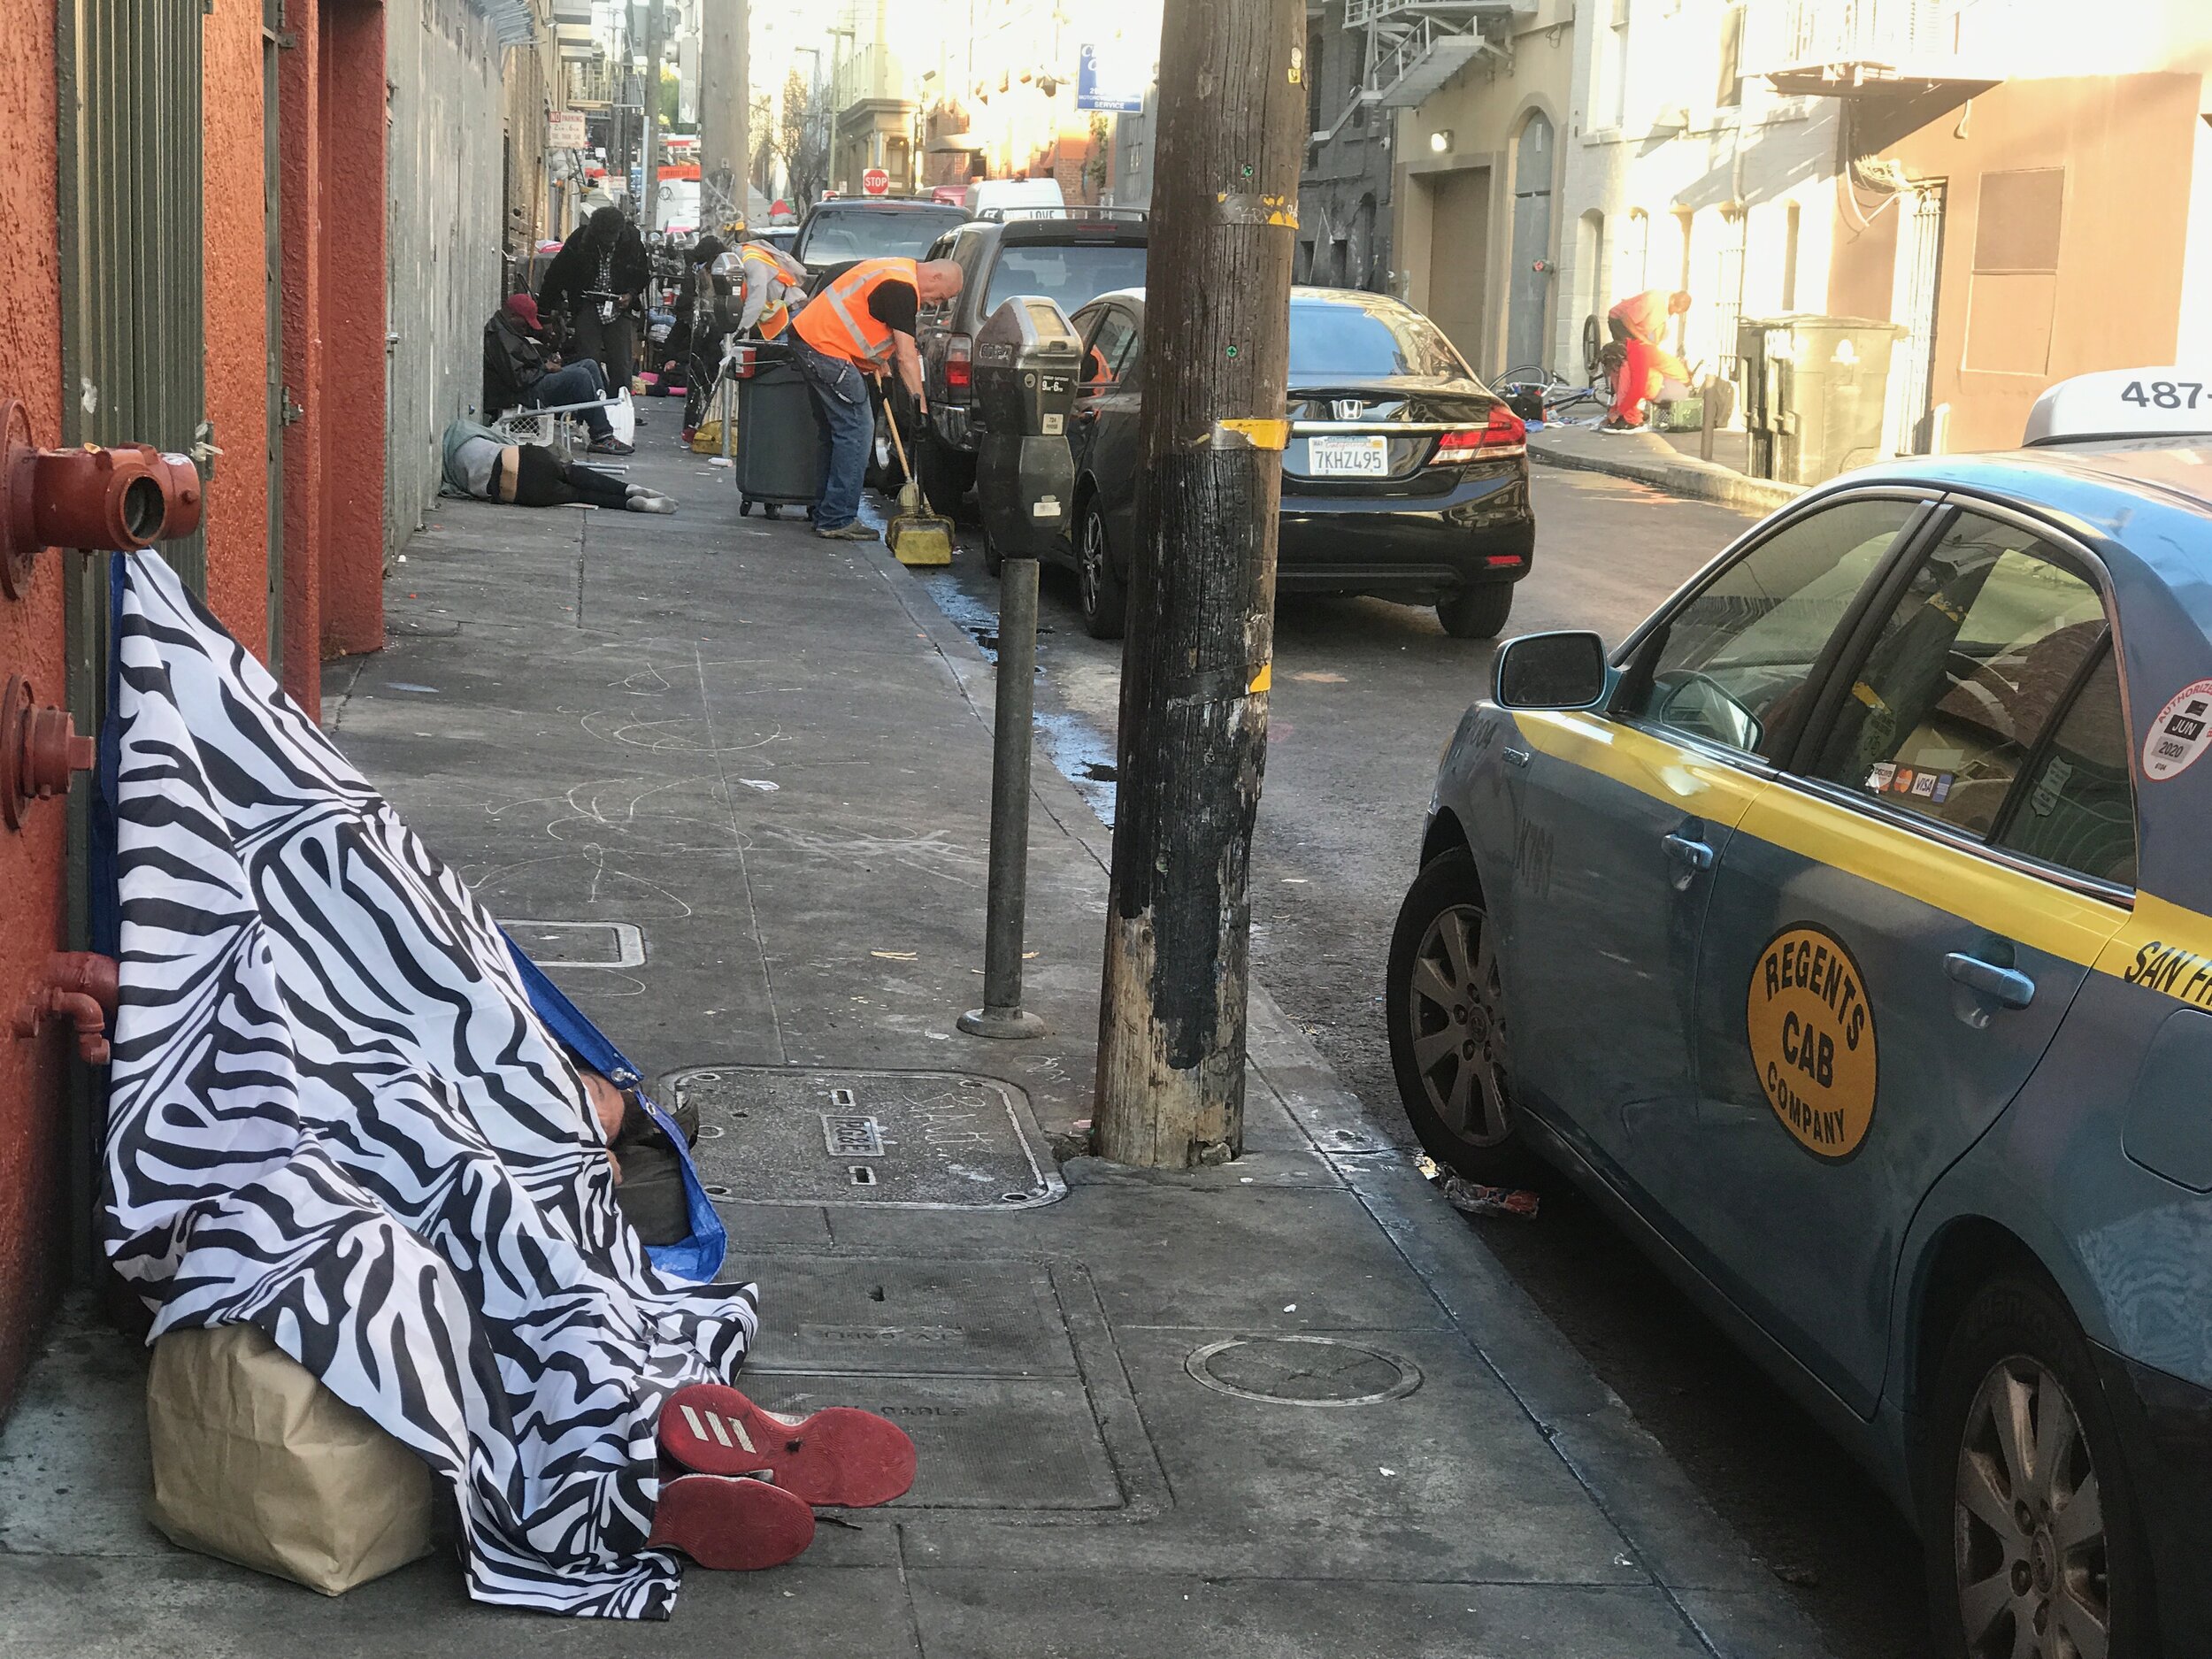  City workers carefully clean up sidewalks in the Tenderloin without disturbing sleeping homeless people. For a century, the Tenderloin has been a haven for the down-and-out. 